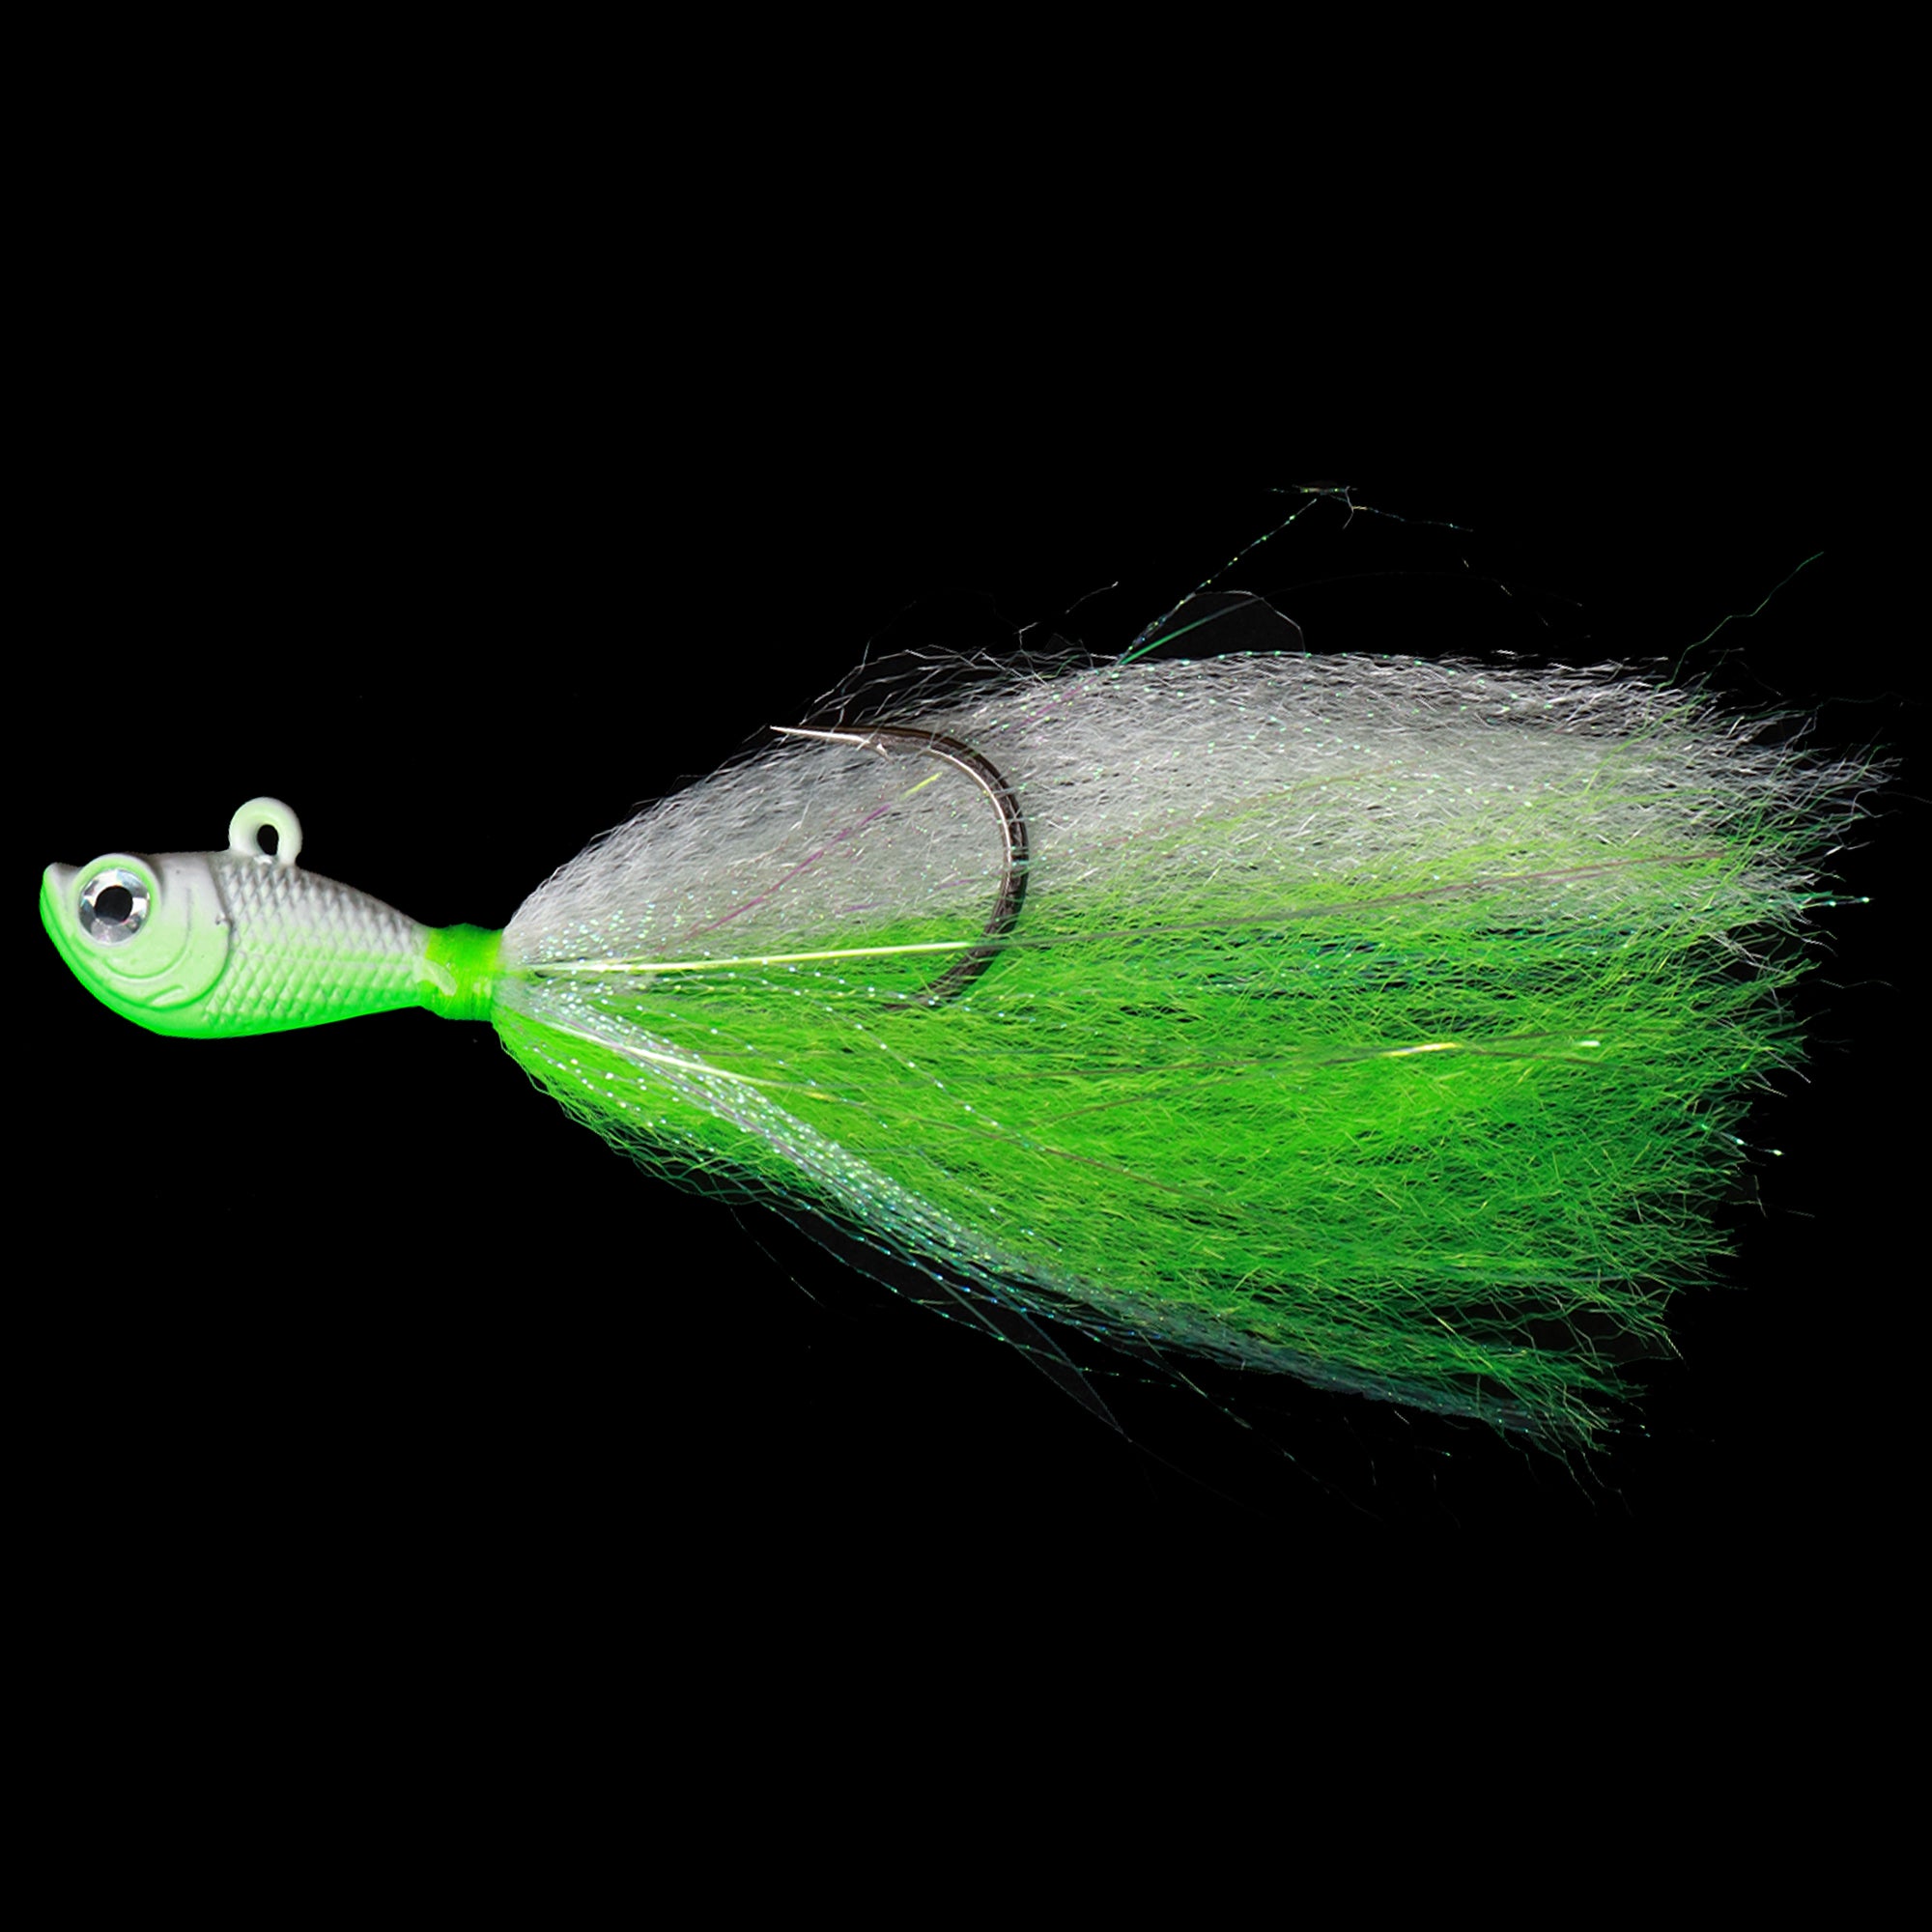 Bait Stalker Jigs: Artificial Lures for Catching Catfish, 3-Pack, Green Crappie / 1 oz